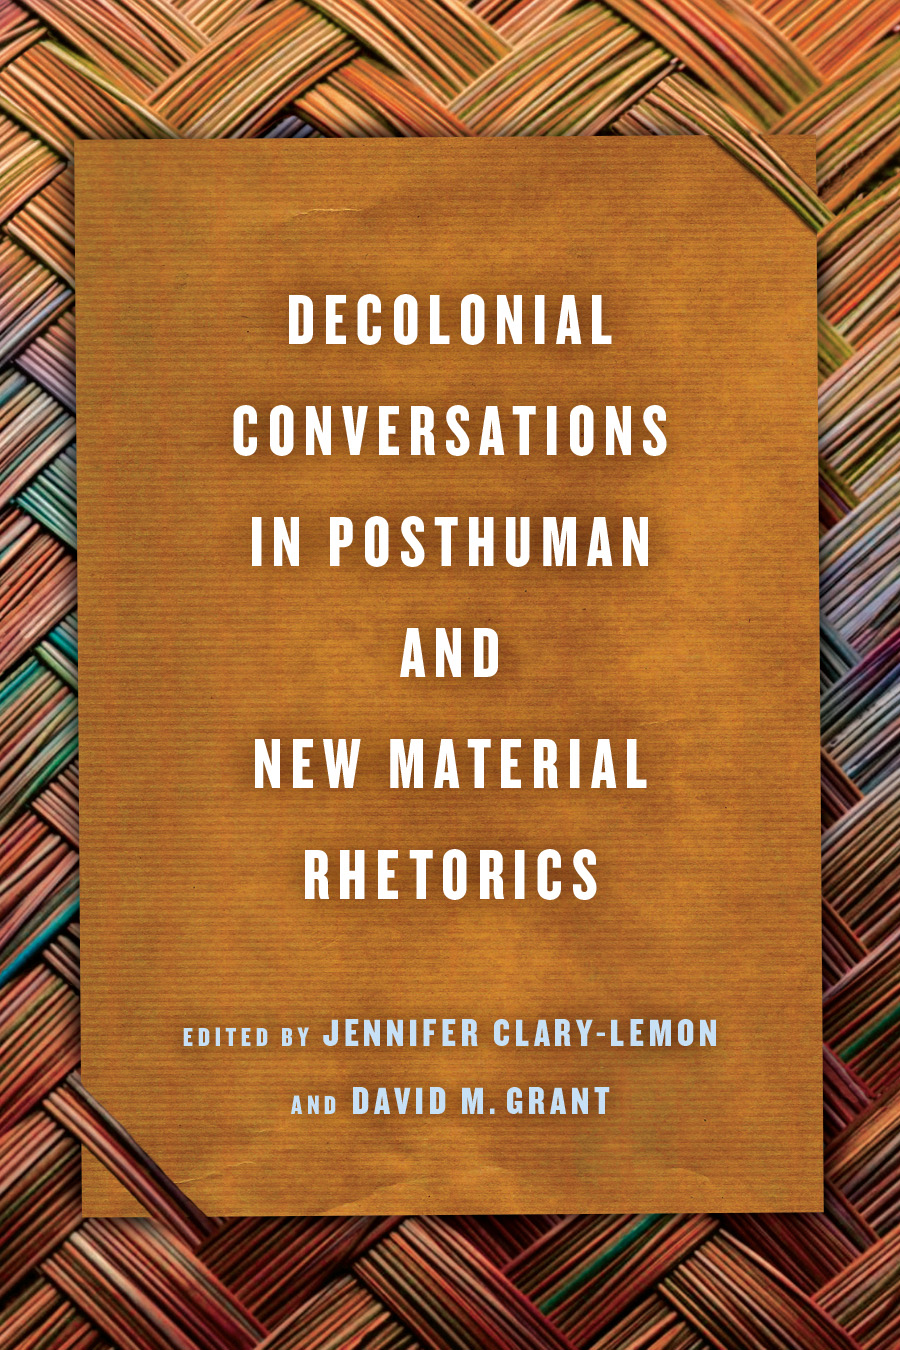 Decolonial Conversations in Posthuman and New Material Rhetorics book cover